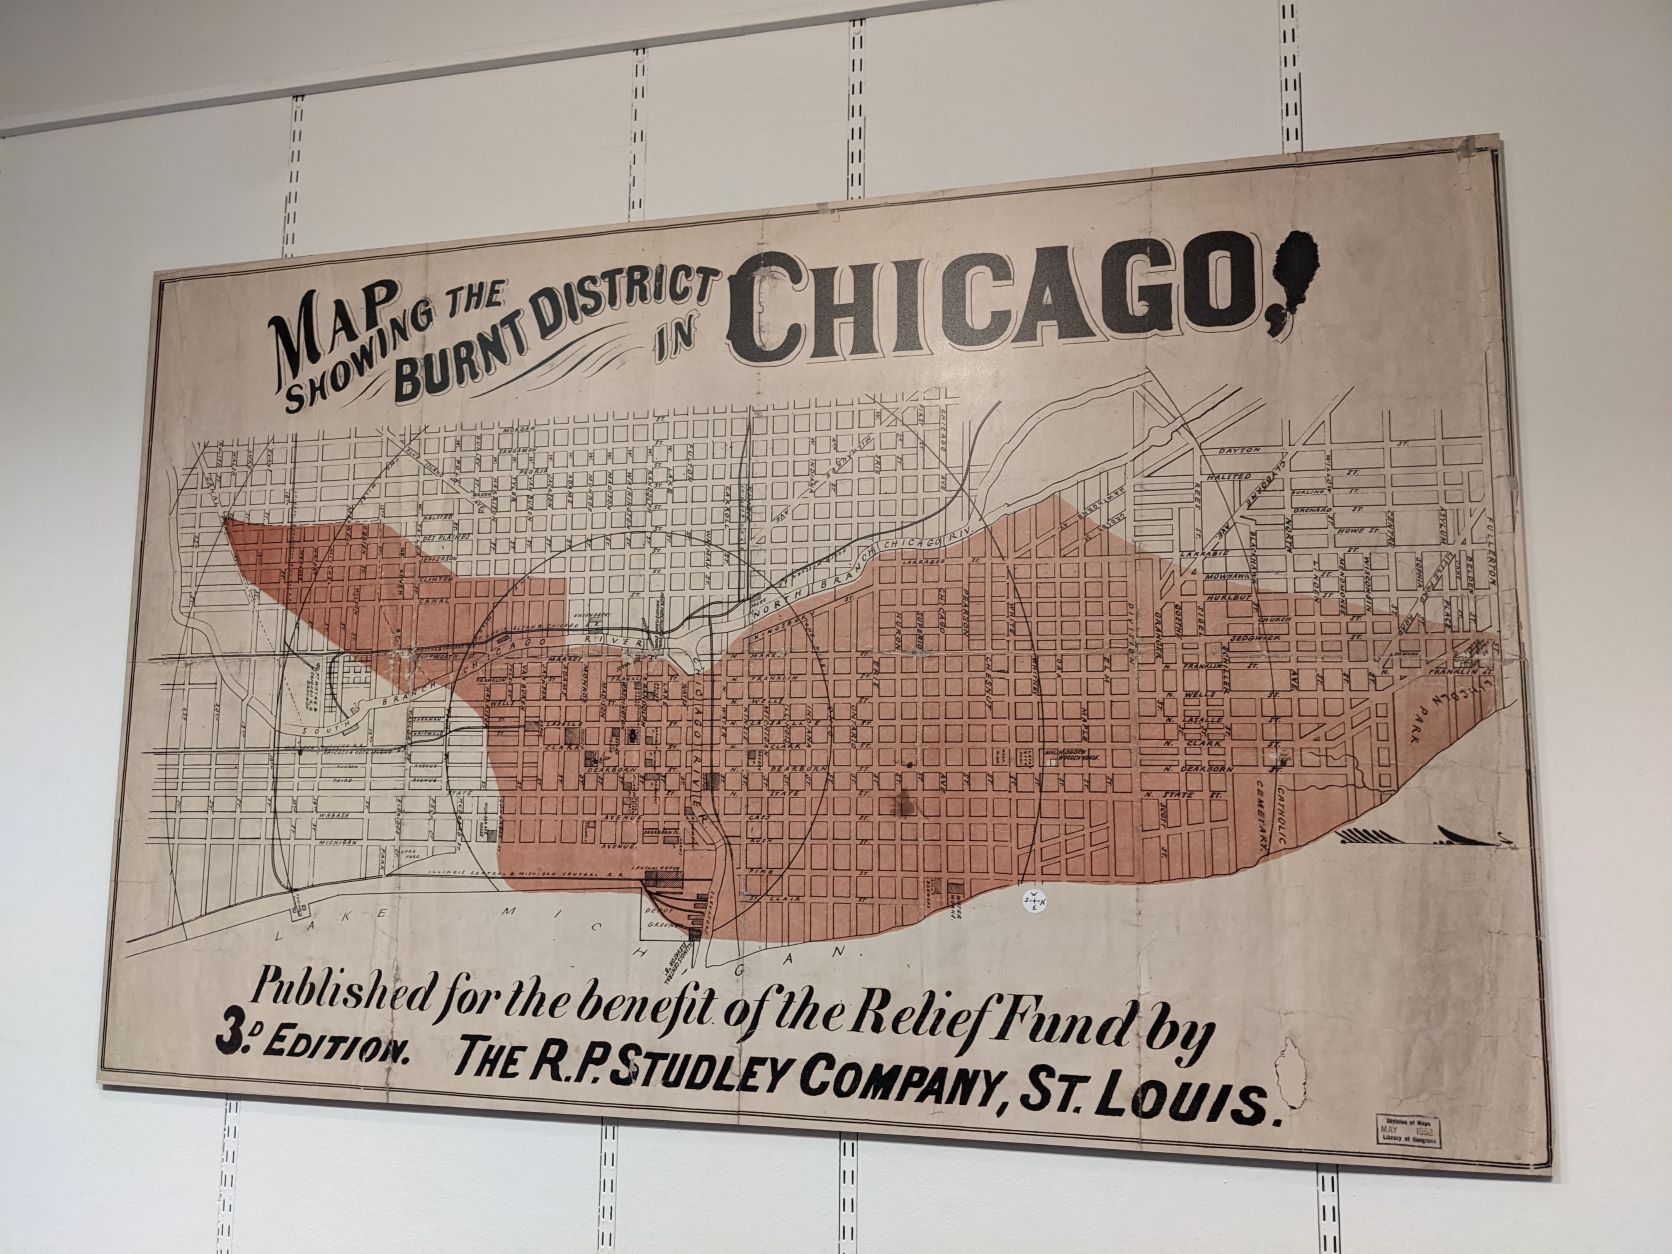 A map showing the burnt area of the fire of Chicago. The schematic grid map is tinged red with the burnt area shown and the centre point of the fire surrounded by regular concentric rings. The north of the map is to the right. The original printed caption reads: 'Map showing the burnt distric in Chicago, [beneath the map the caption then reads:] 'Published for the Relief Fund by The R.P. Studley Company, St. Louis. 3rd Edition.